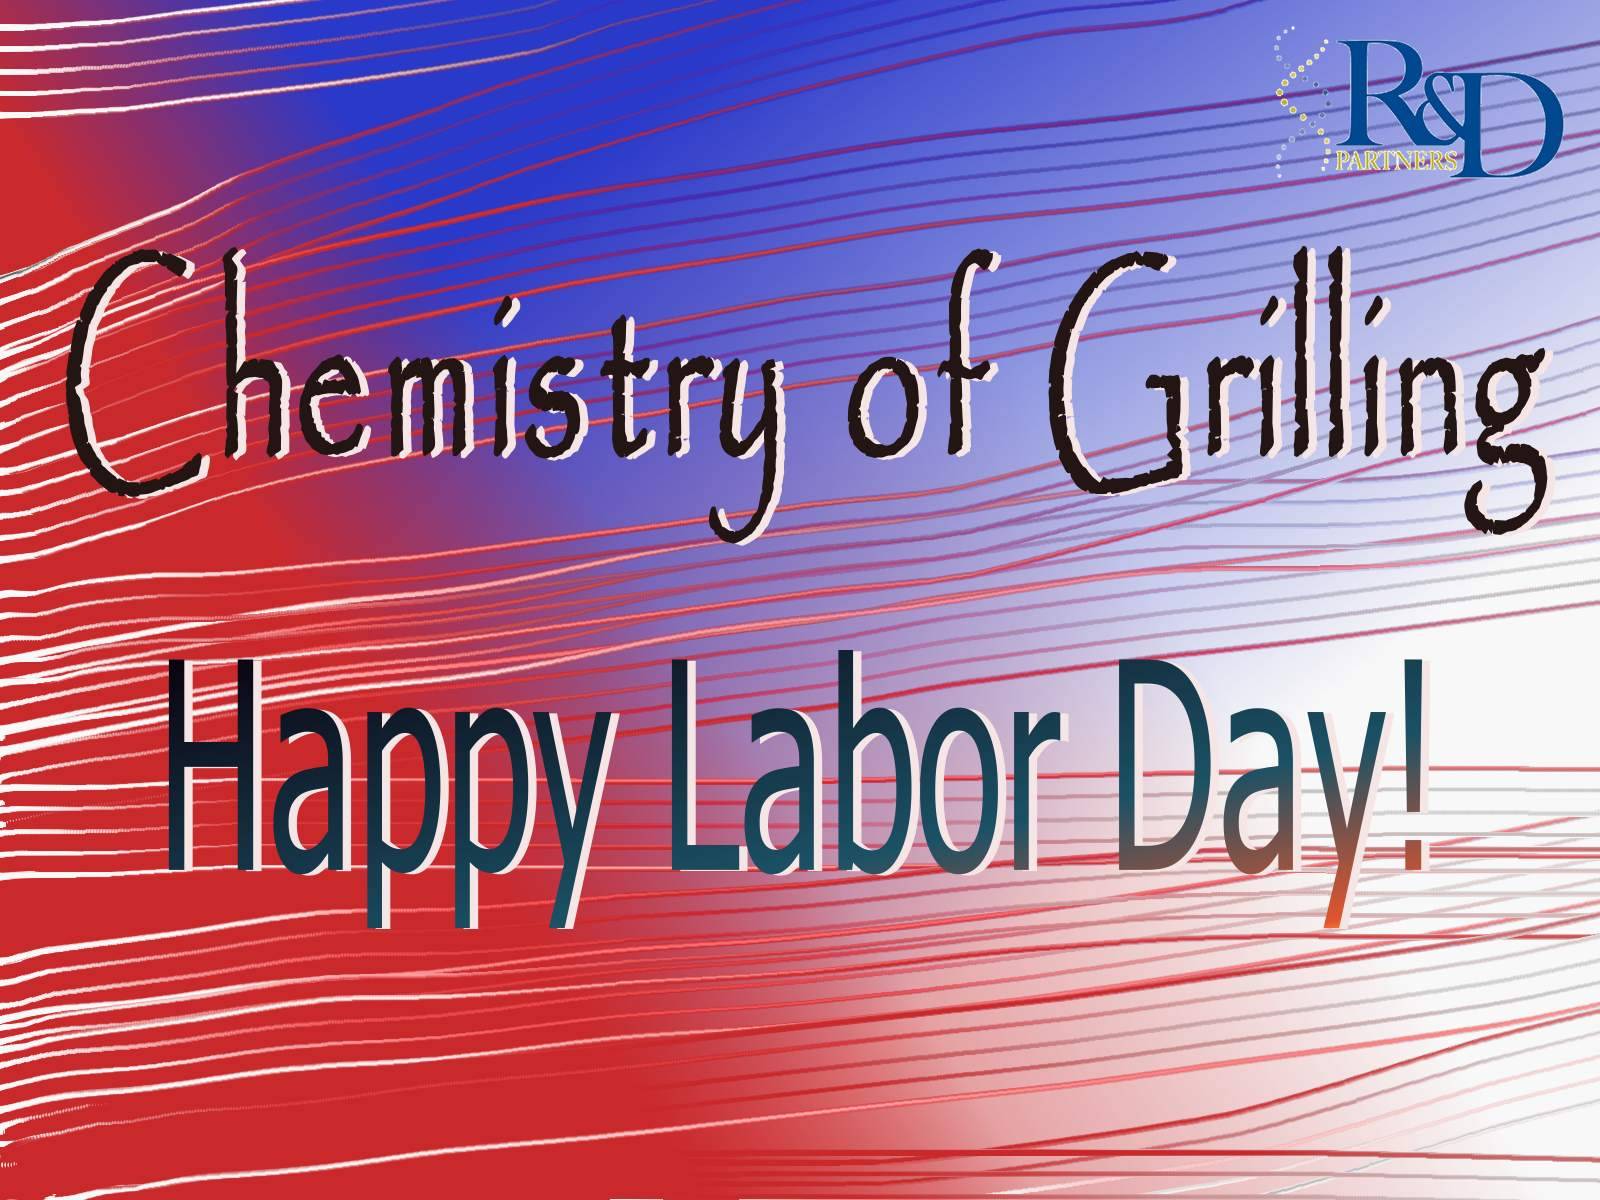 Chemistry of Grilling - Happy Labor Day - RD Partners